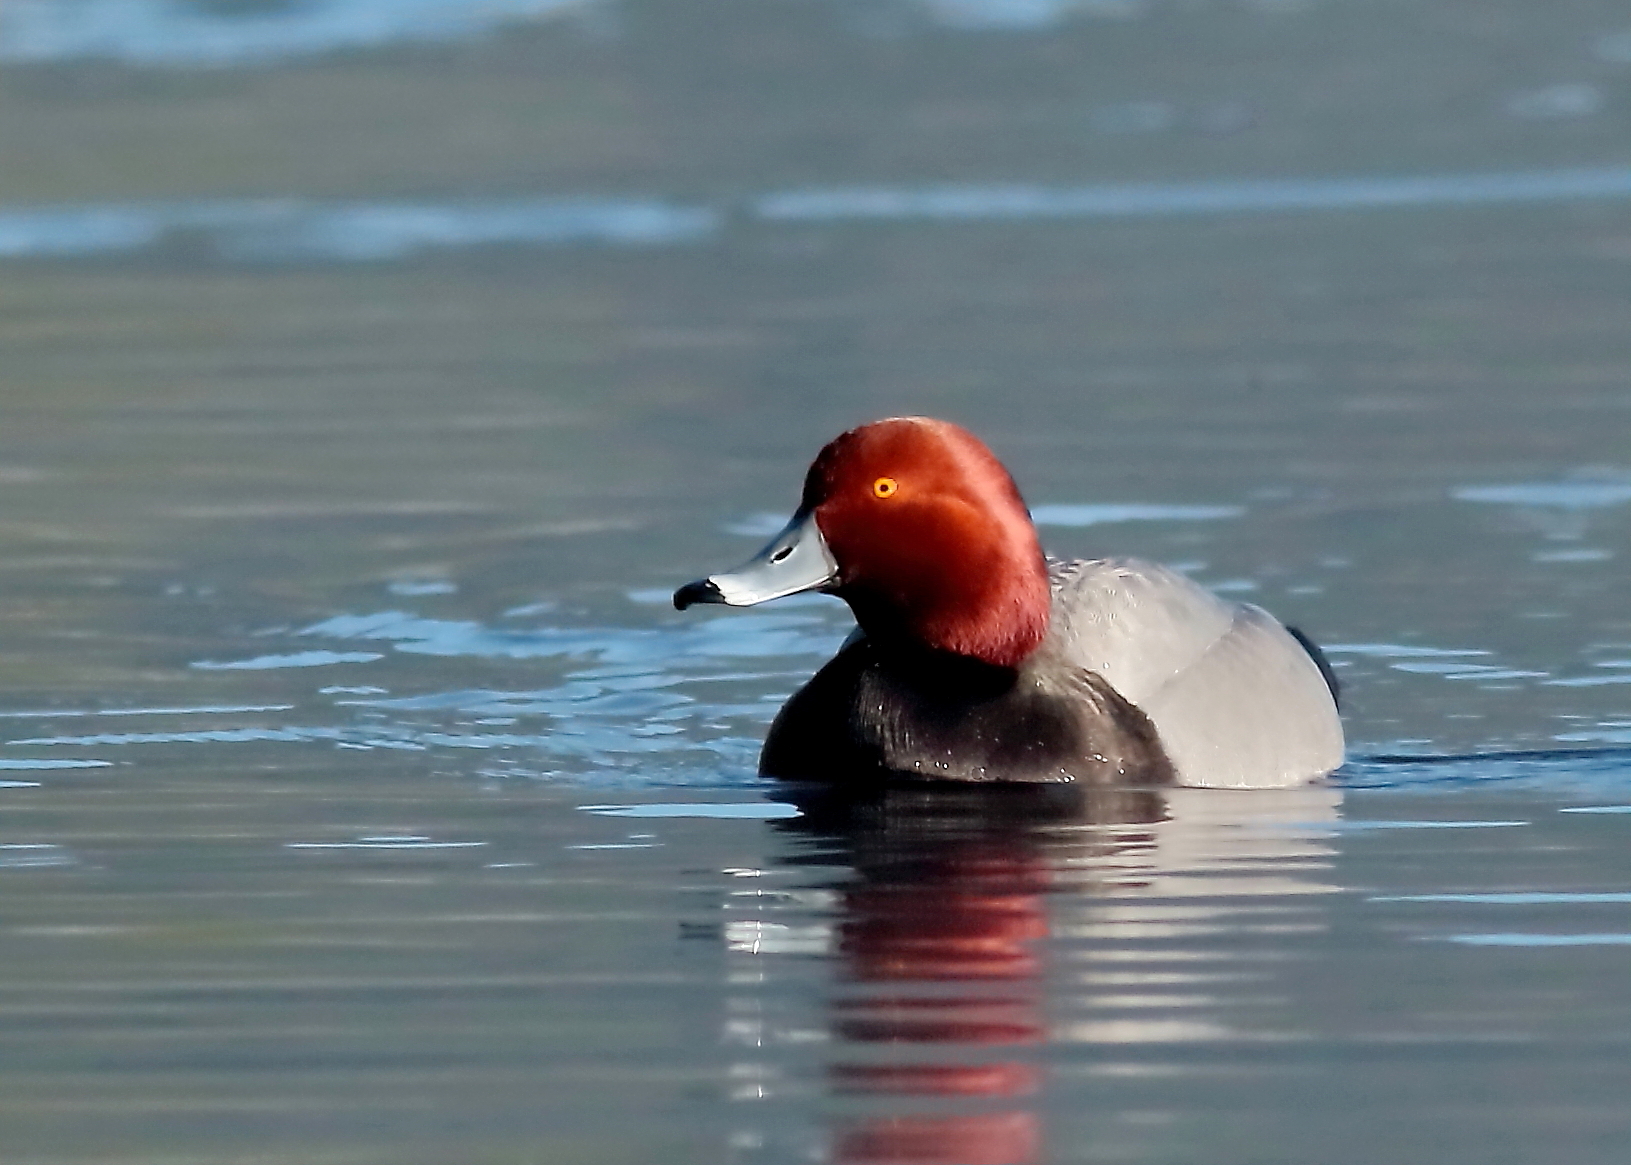 duck on water with red head and black breast